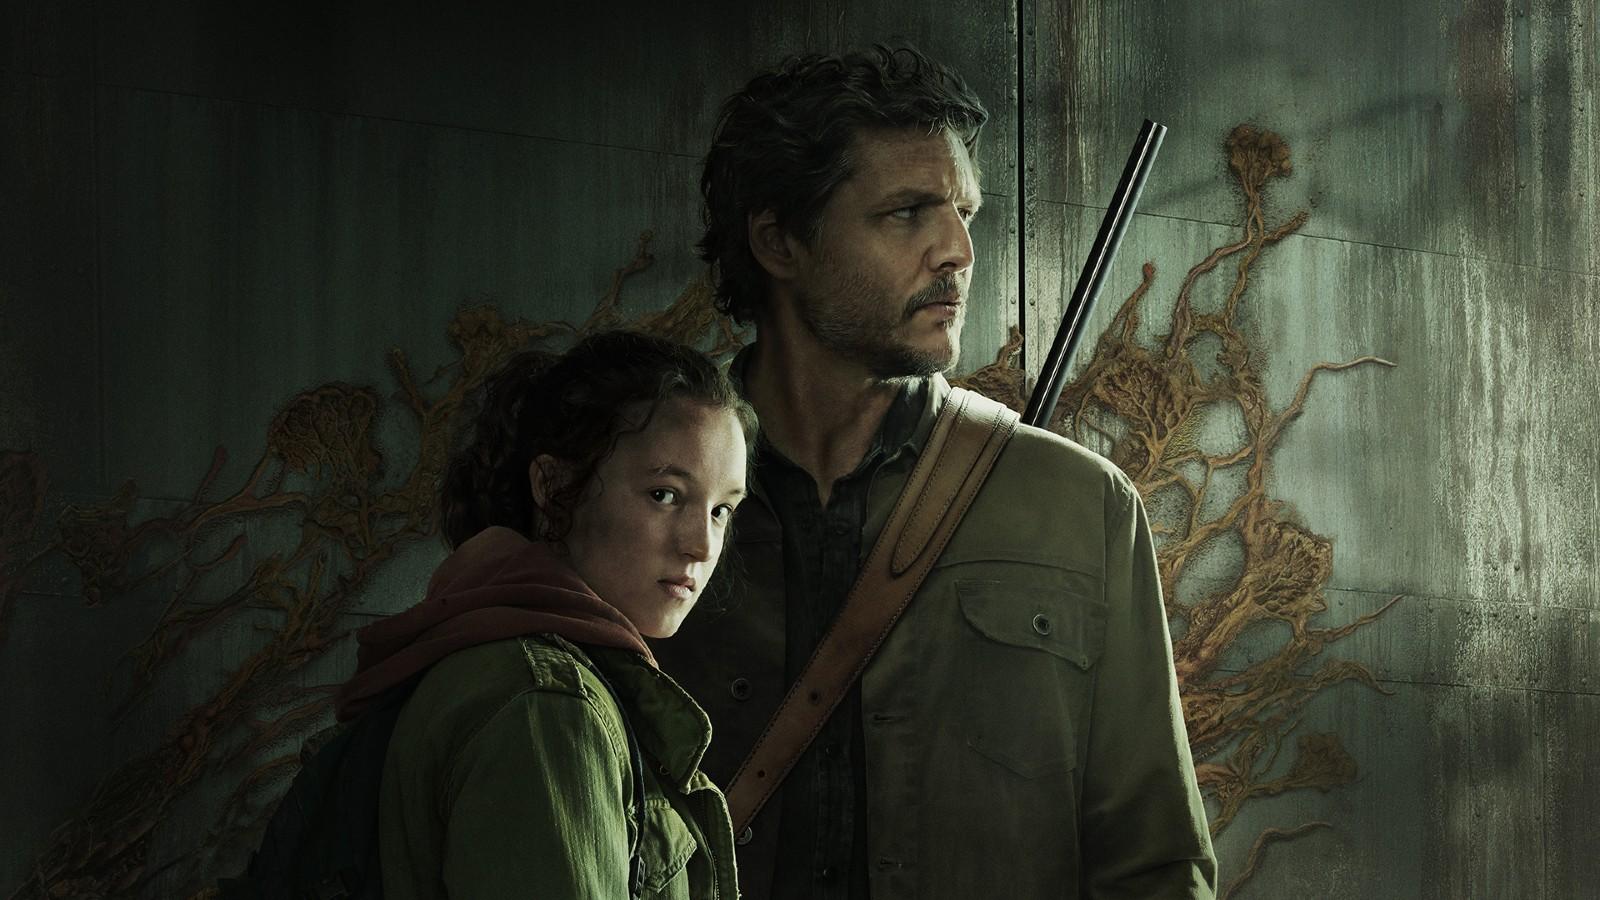 An image of Joel and Ellie in HBOs The Last of Us, played by Pedro Pascal and Bella Ramsey.